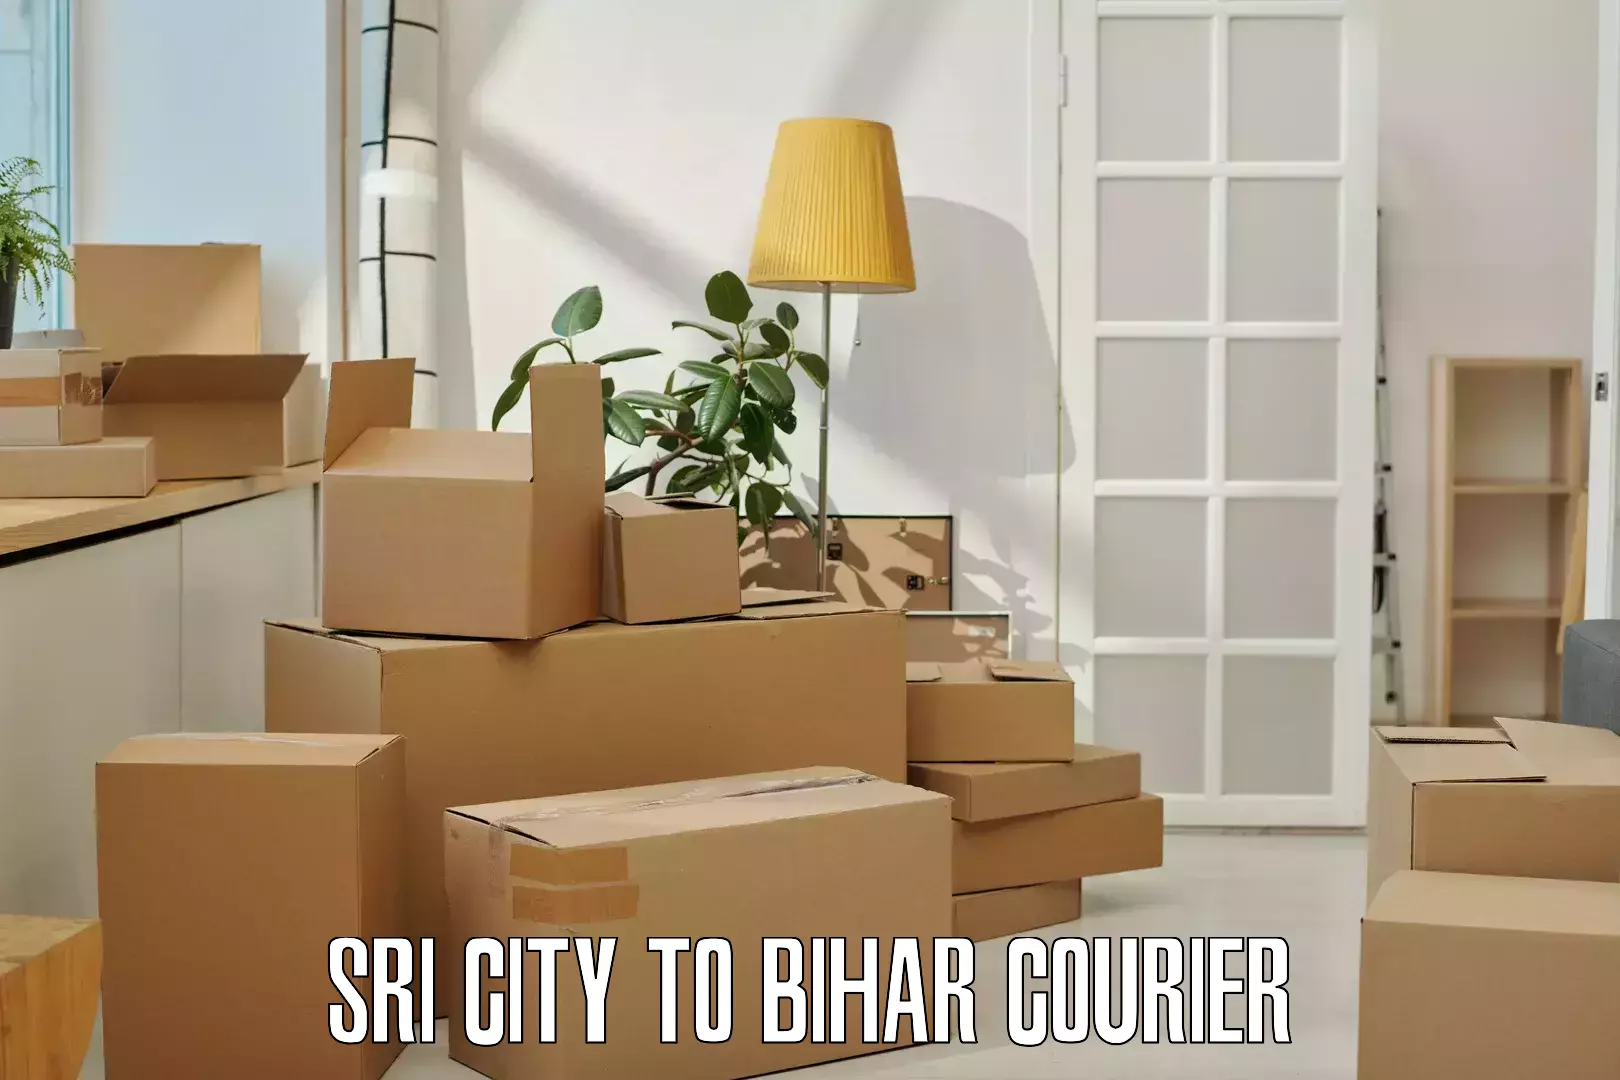 Secure freight services Sri City to Kursela